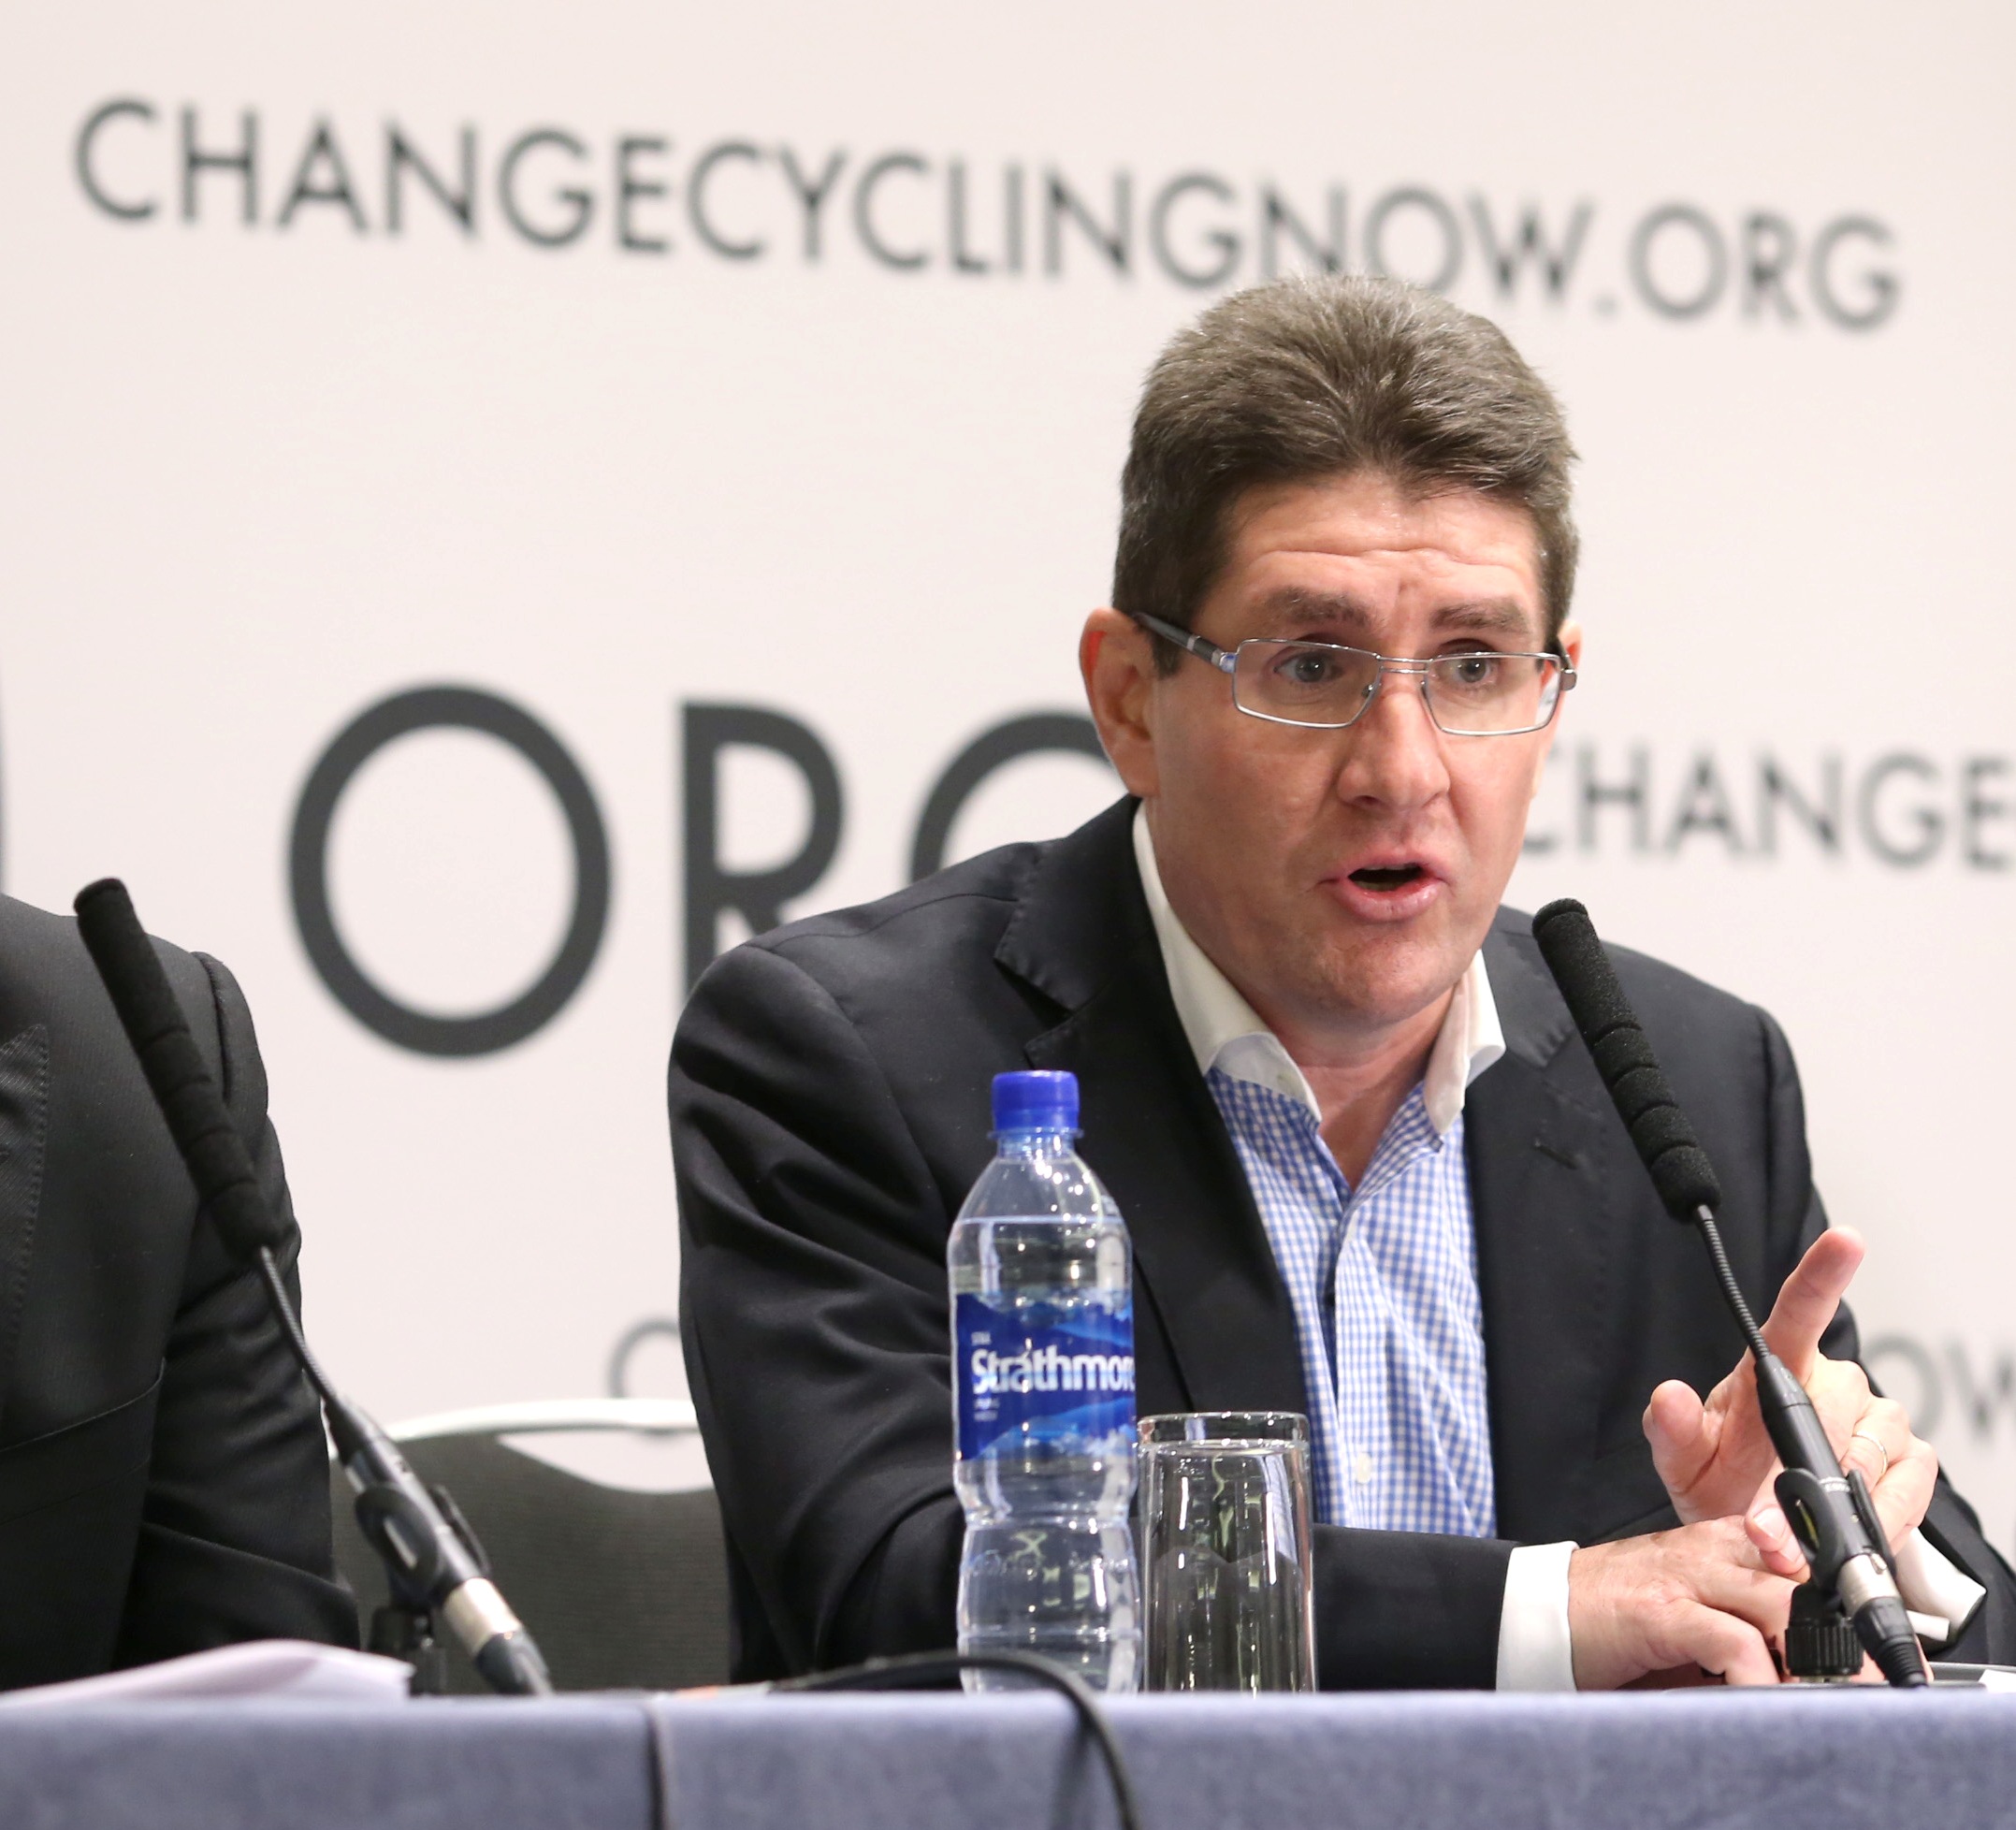 Paul Kimmage at Change Cycling Now press conference December 2012